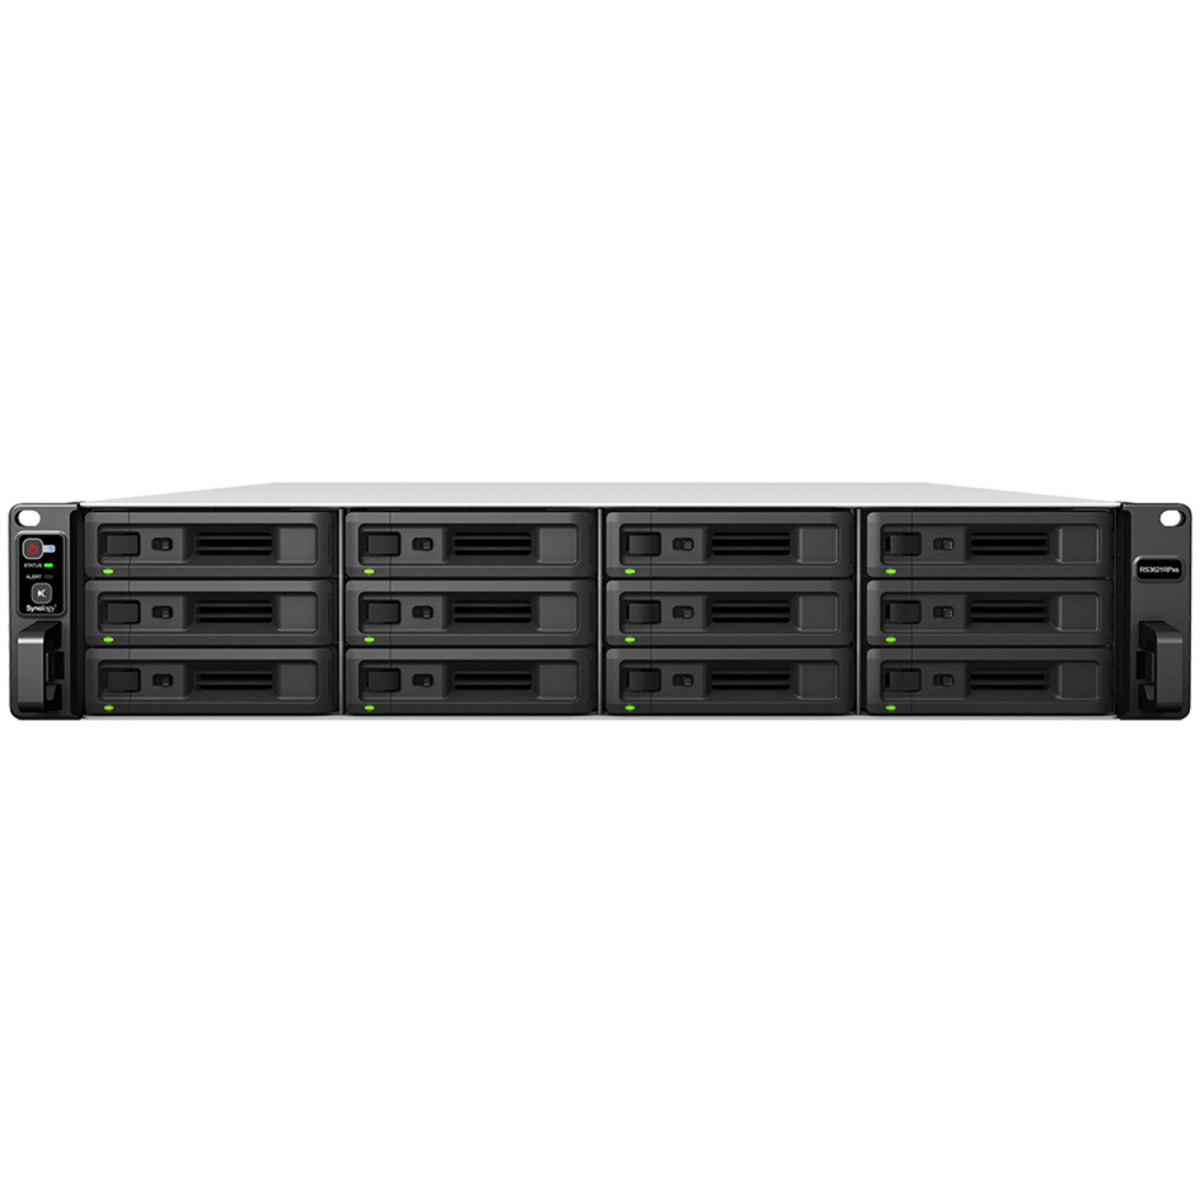 buy $6990 Synology RackStation RS3621RPxs 96tb RackMount NAS - Network Attached Storage Device 12x8000gb Toshiba Enterprise Capacity MG08ADA800E 3.5 7200rpm SATA 6Gb/s HDD ENTERPRISE Class Drives Installed - Burn-In Tested - ON SALE - nas headquarters buy network attached storage server device das new raid-5 free shipping usa christmas new year holiday sale RackStation RS3621RPxs